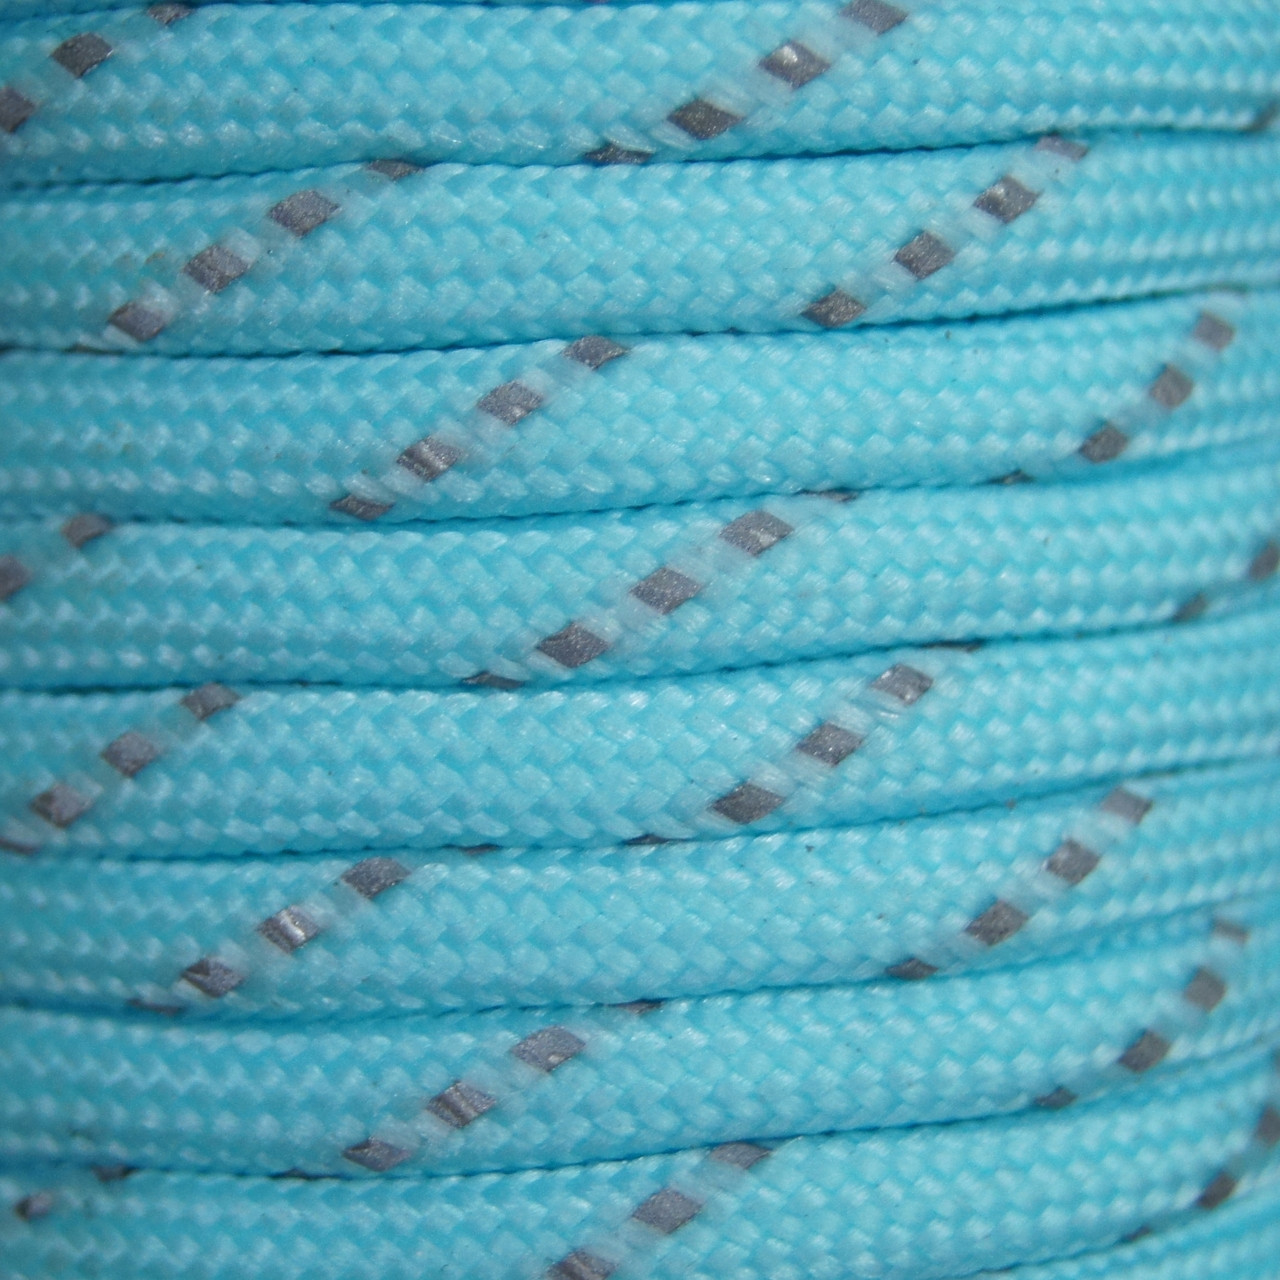 https://cdn2.bigcommerce.com/server5500/b8c04/products/787/images/1510/Blue_Glow_In_The_Dark_Reflective_Paracord__39865.1381874764.1280.1280.jpg?c=2